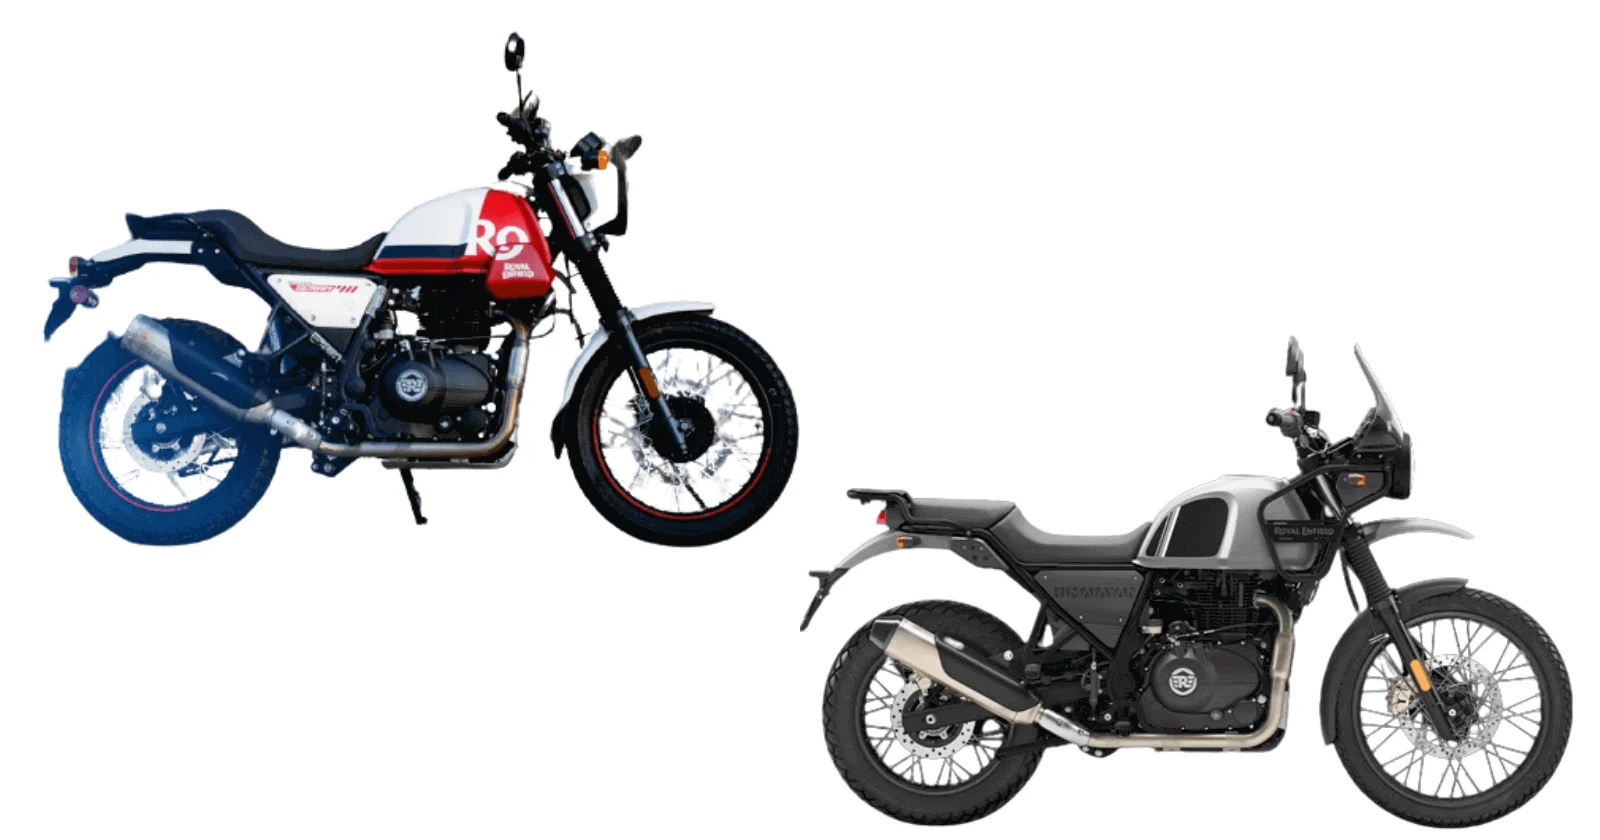 Royal Enfield Scram 411 vs Royal Enfield Himalayan: Compare Prices, Mileage and More [2023 Guide]